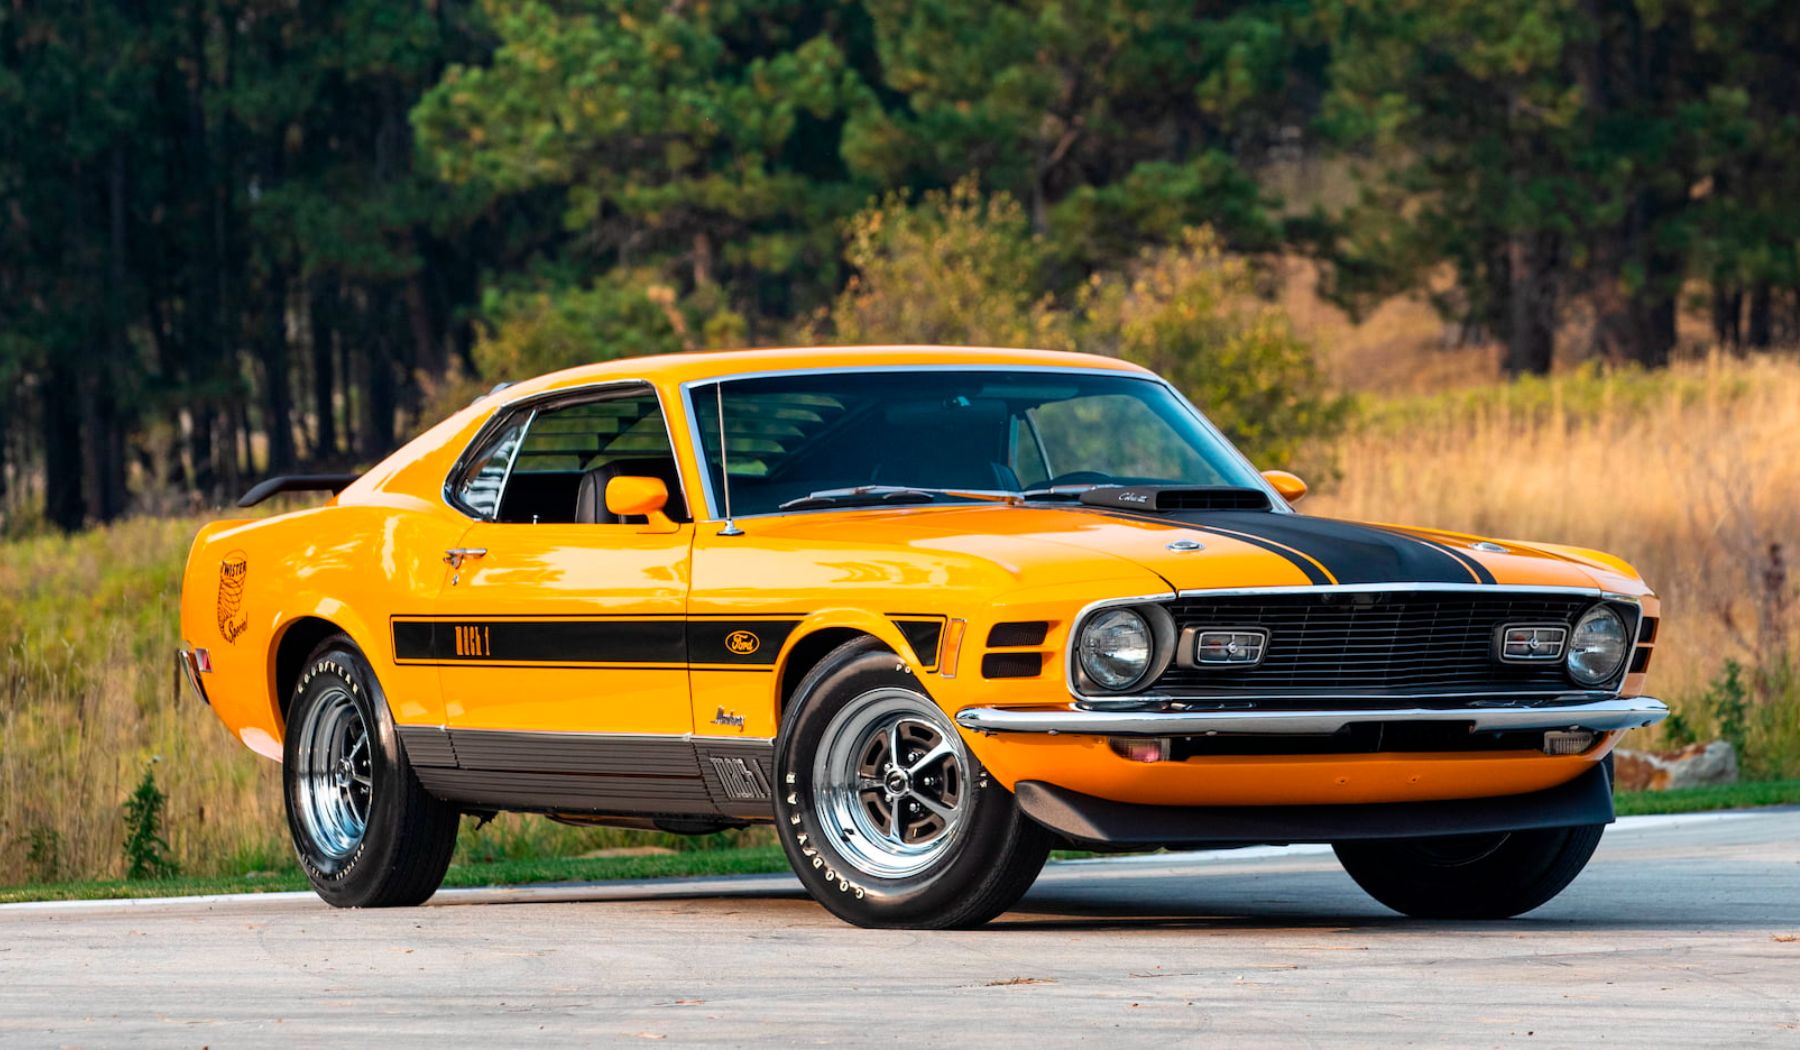 Mach 1 Twister Special: The Story of a Rare, Popular, and Highly Sought ...